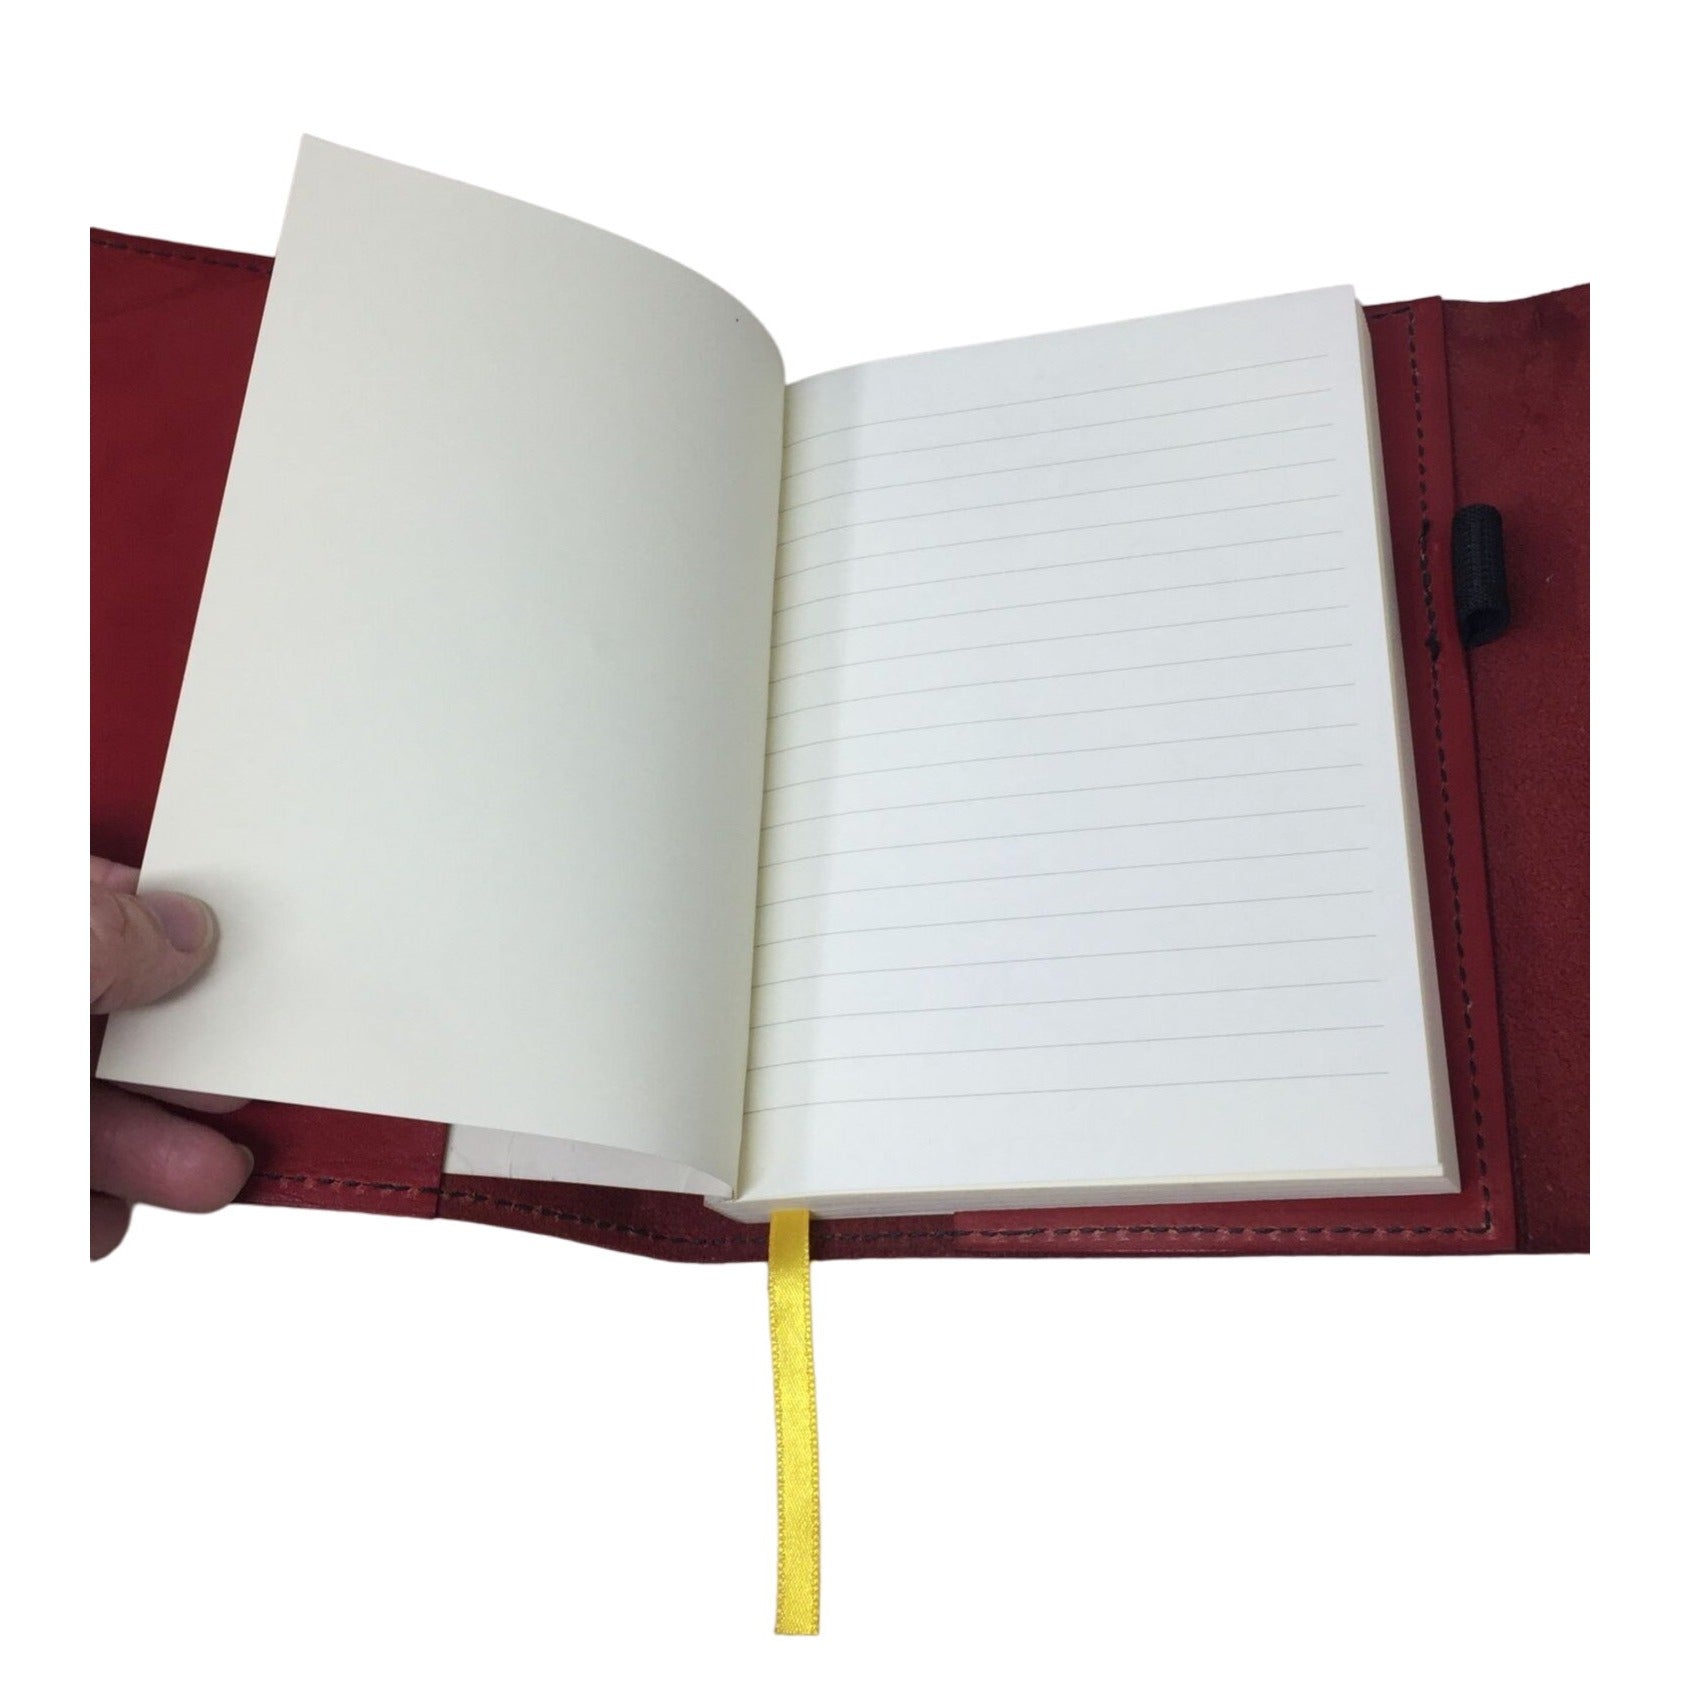 Red Leather Journal with Silver Tone Heart - Refillable Journal with yellow Ribbon marker and  Lock (no pen)